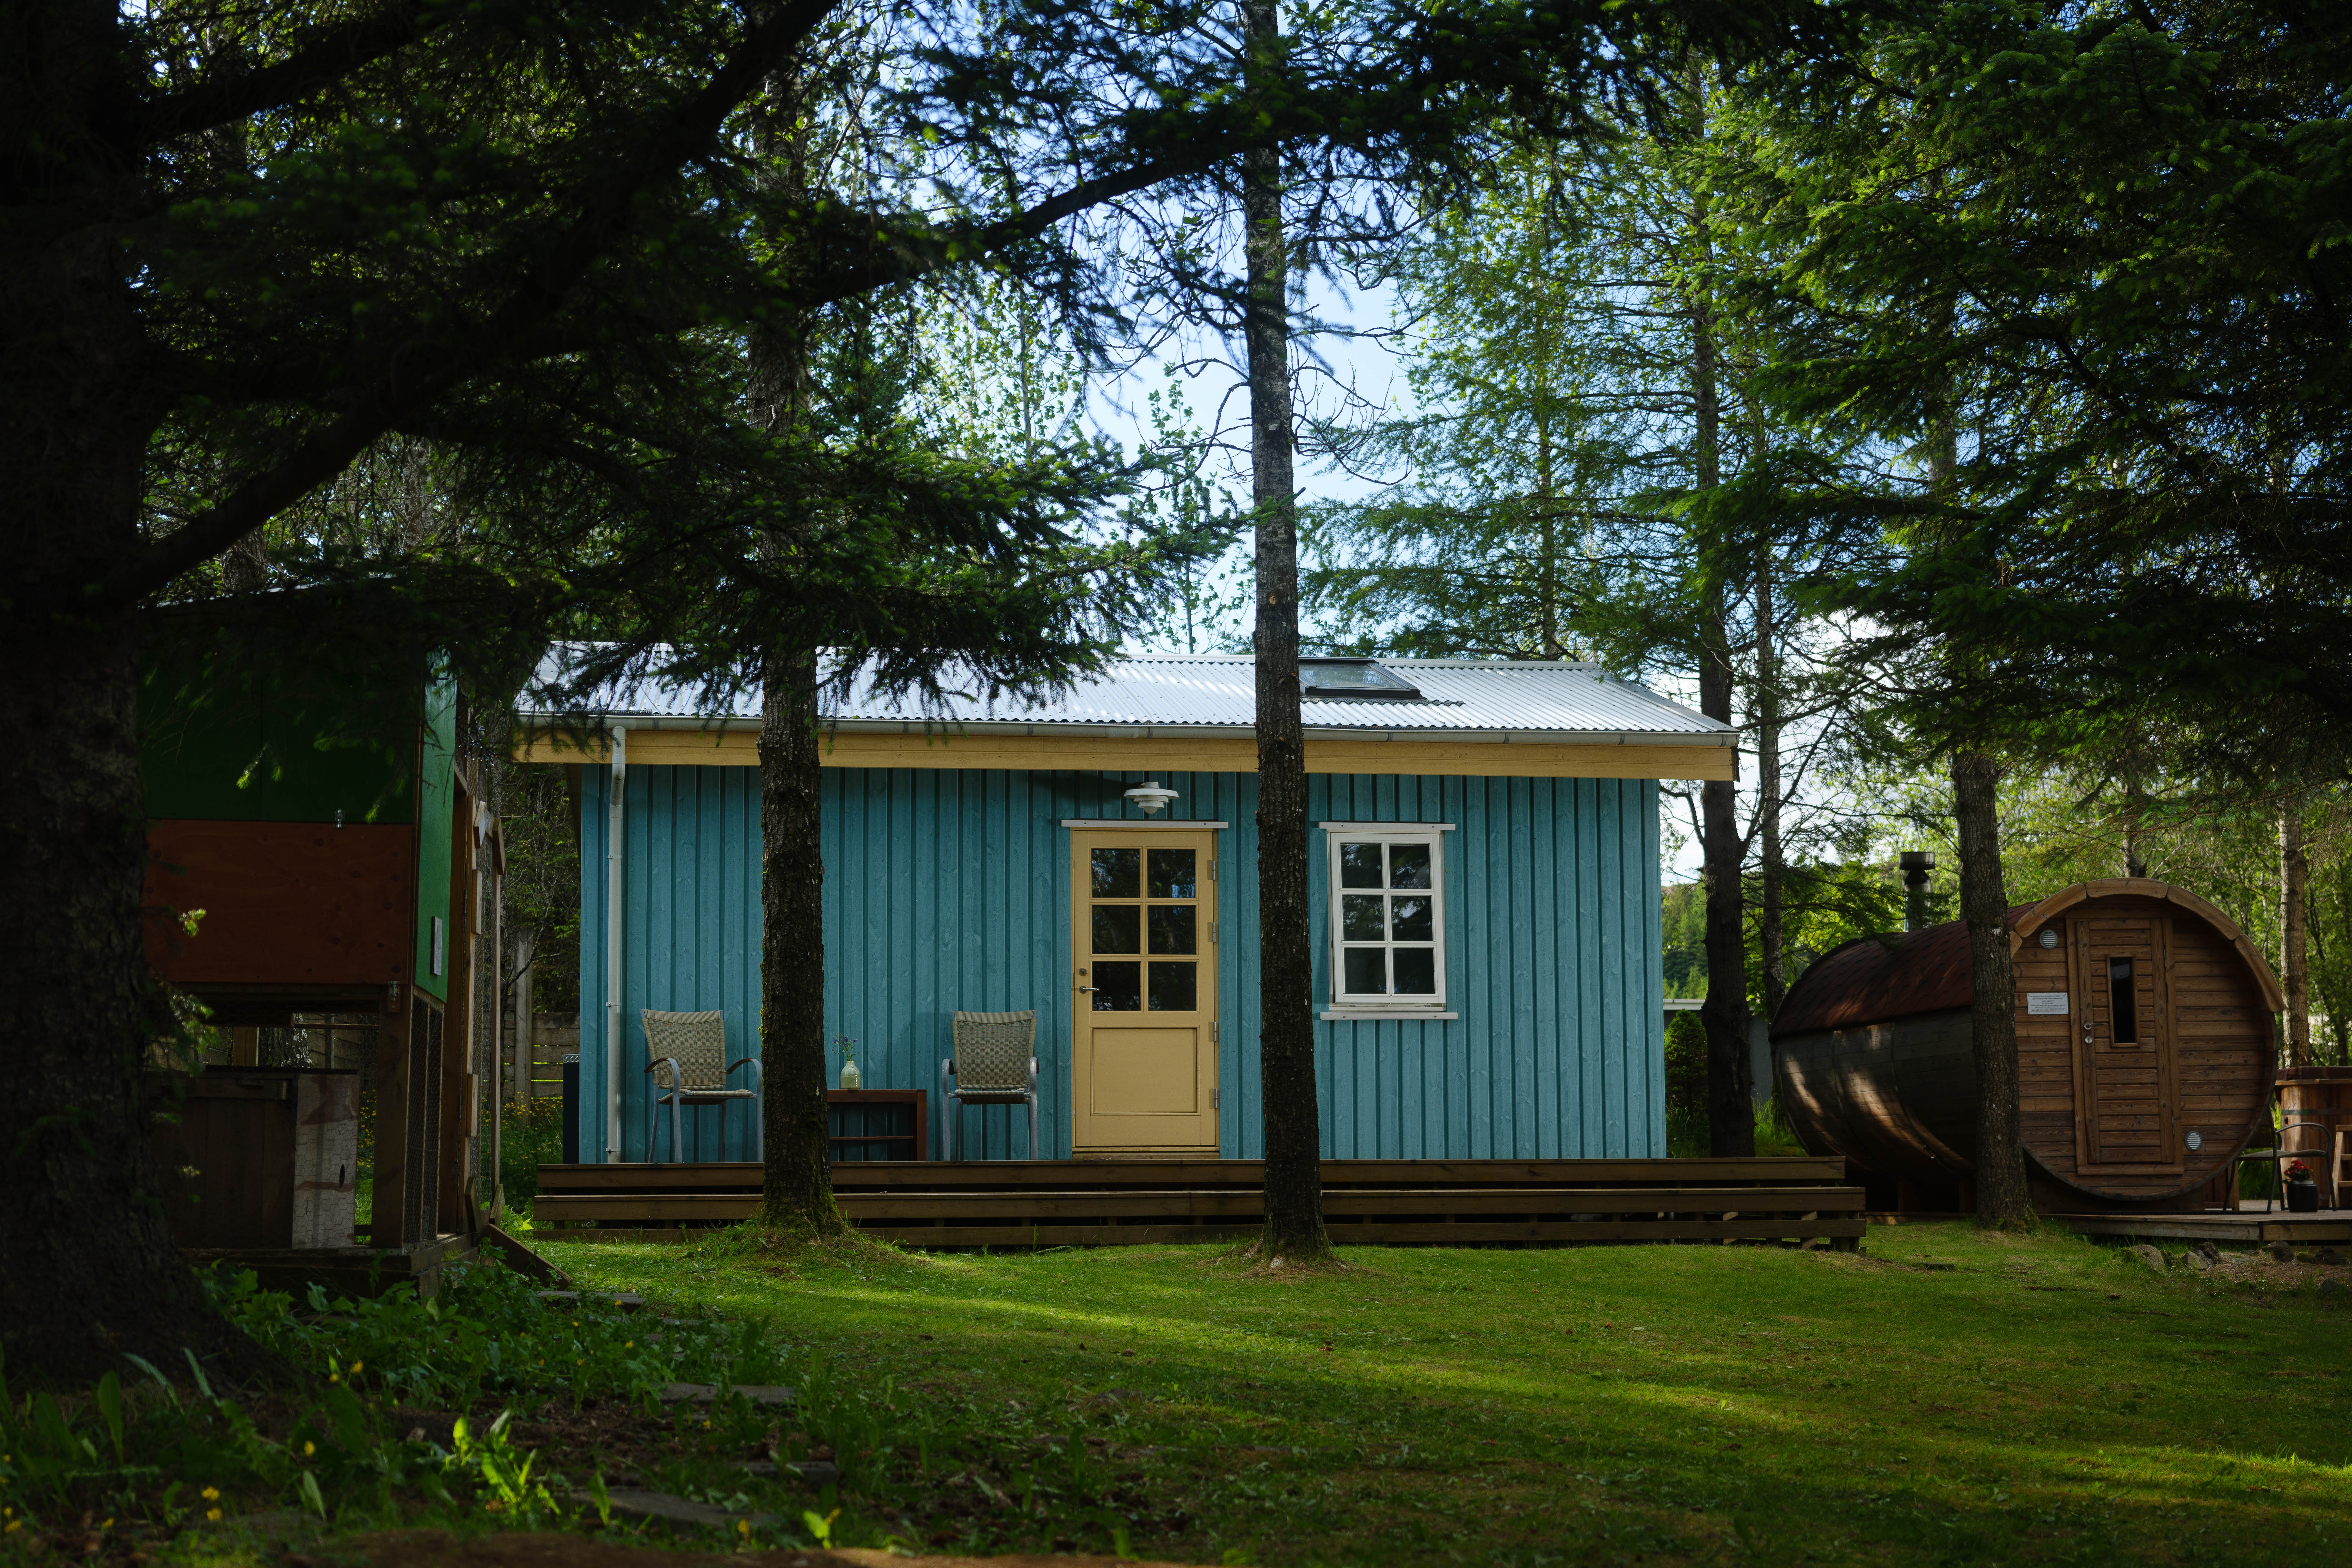 A light blue tiny home with a wood-fired sauna on the side of the house.